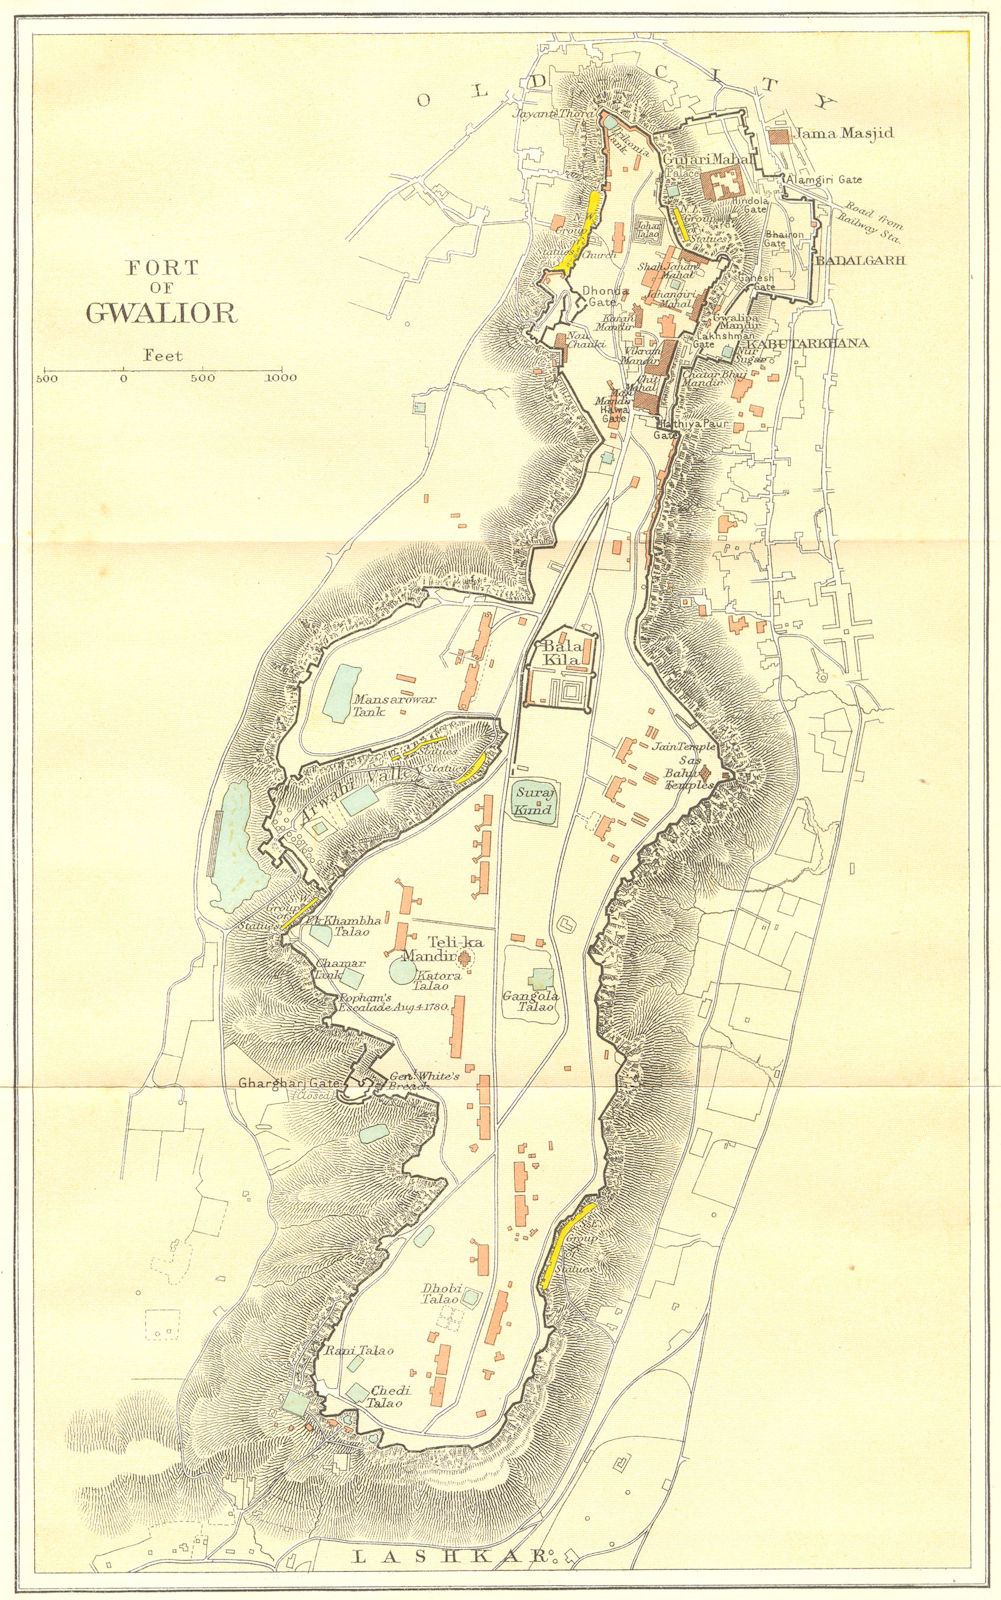 Associate Product INDIA. Fort of Gwalior. Plan. Madhya Pradesh. 1924 old vintage map chart